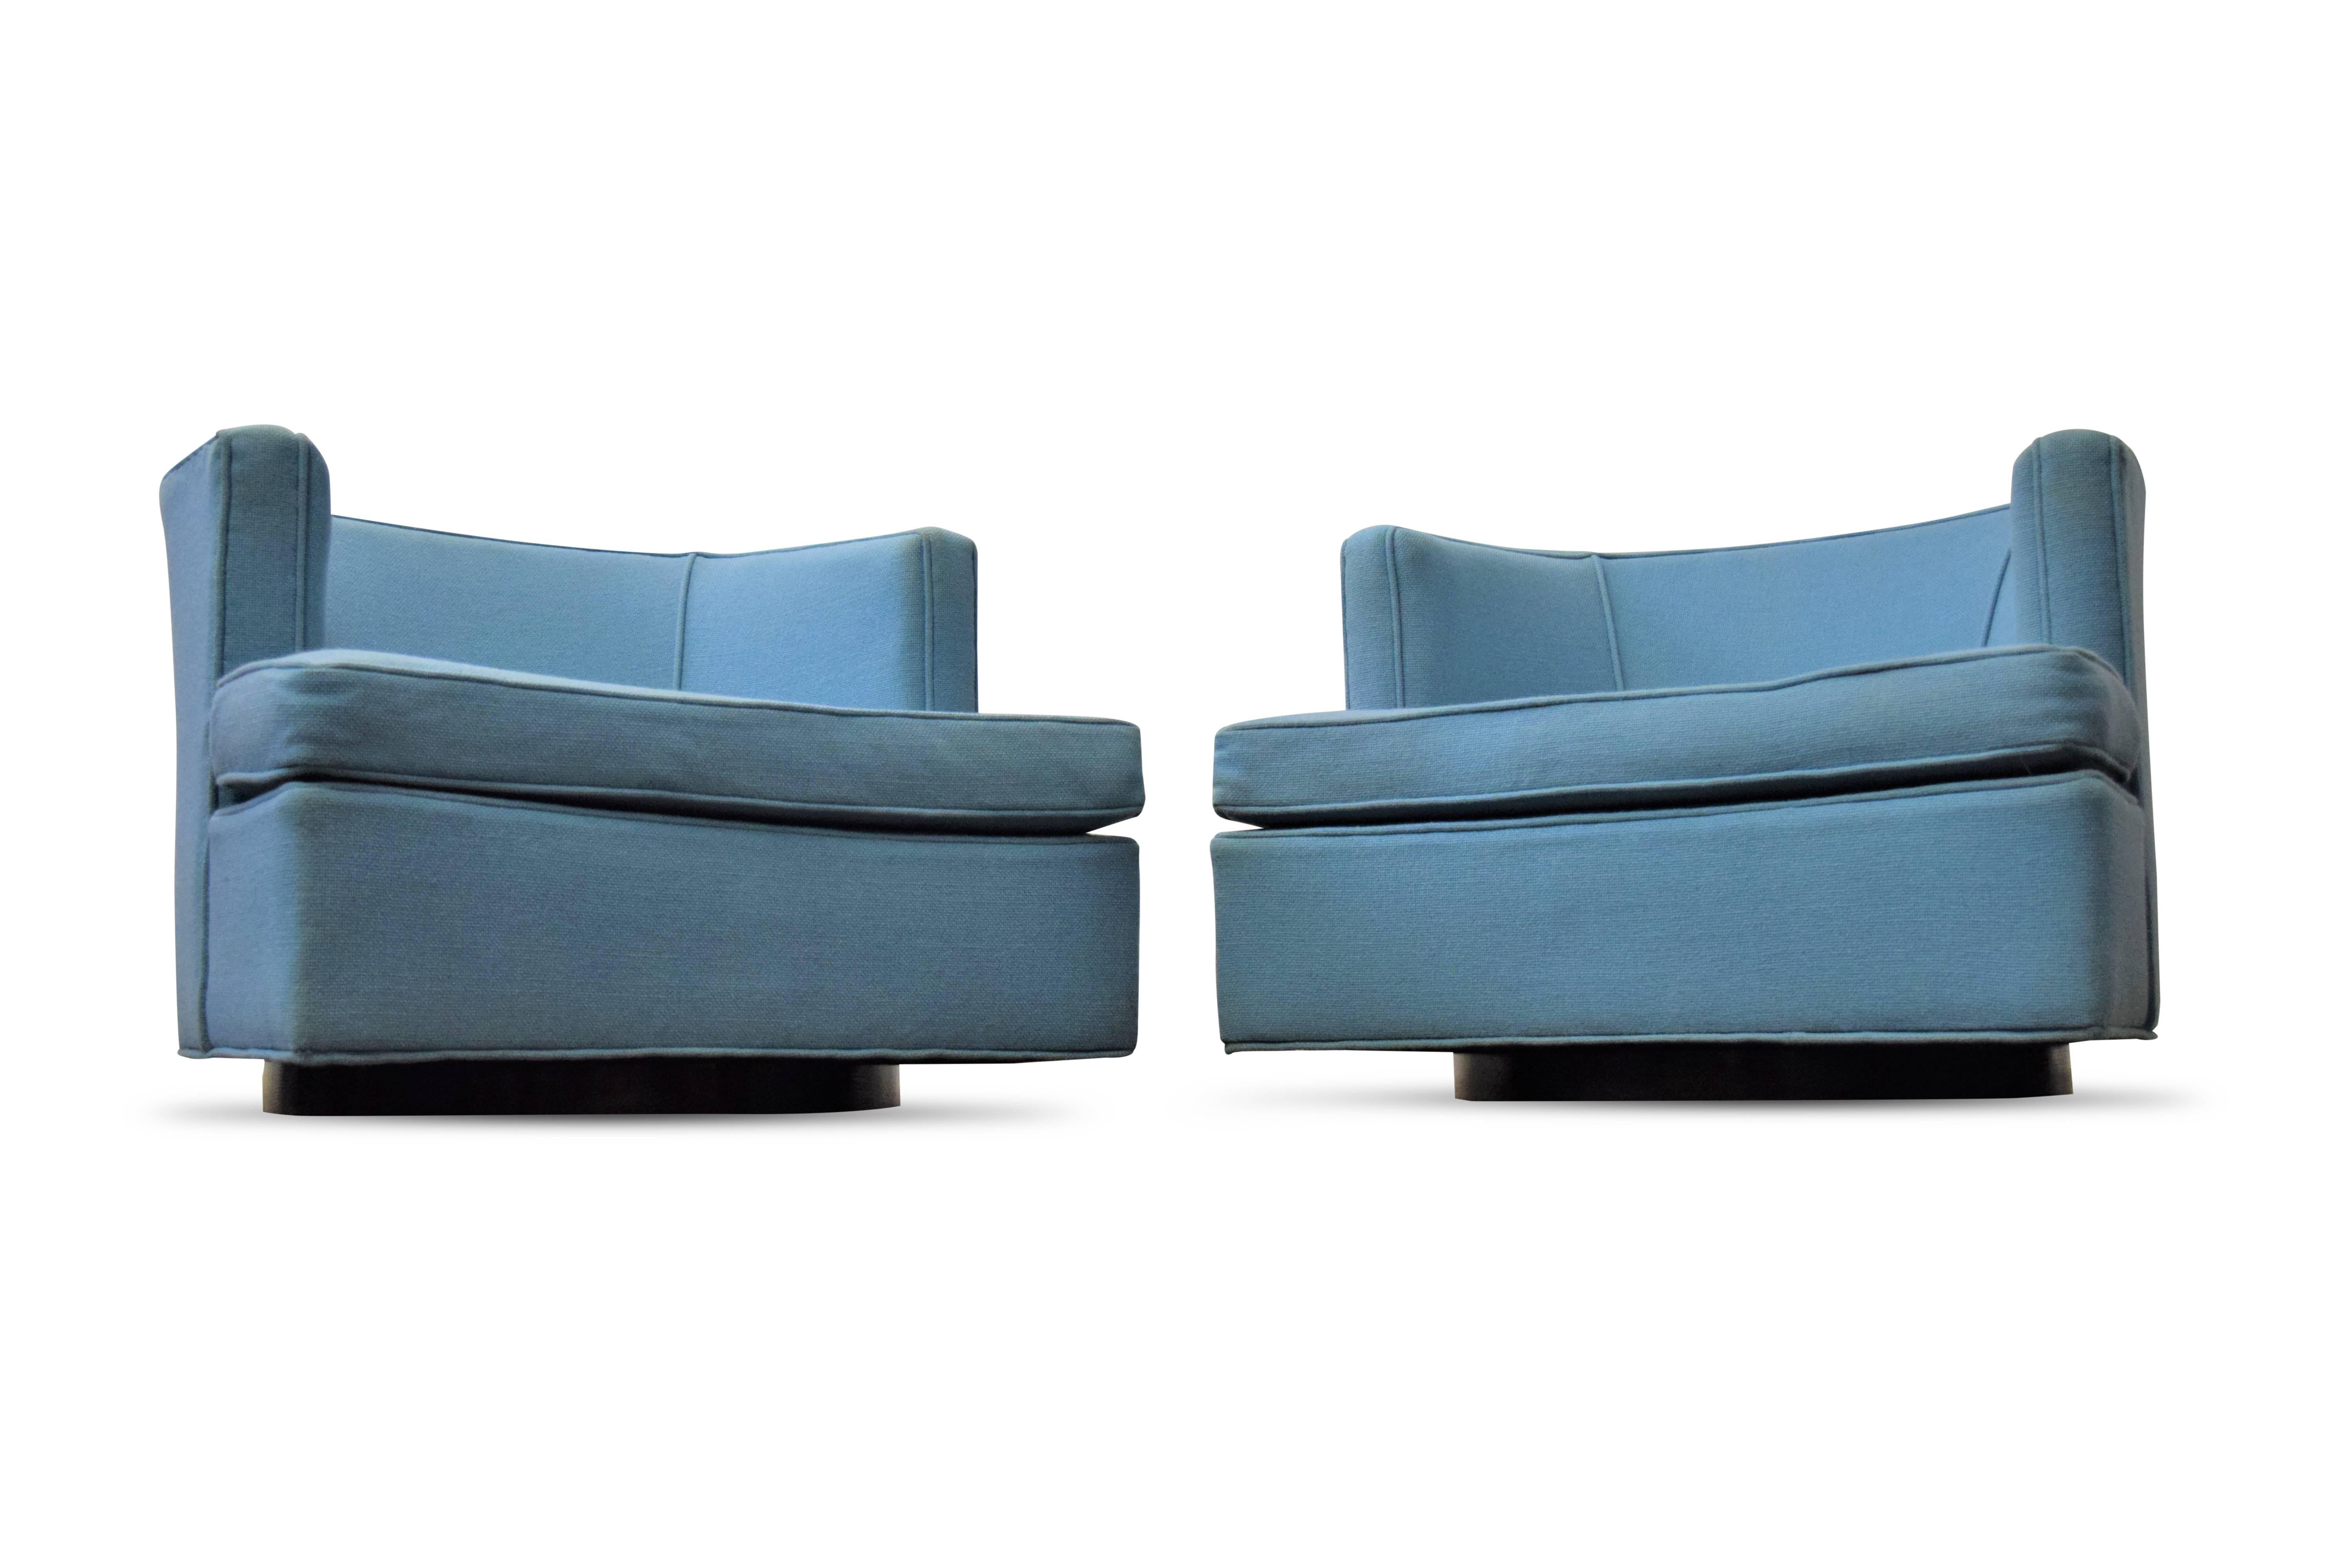 Pair of Harvey Probber swivel lounge chairs. Chairs sit on round dark walnut wooden bases.